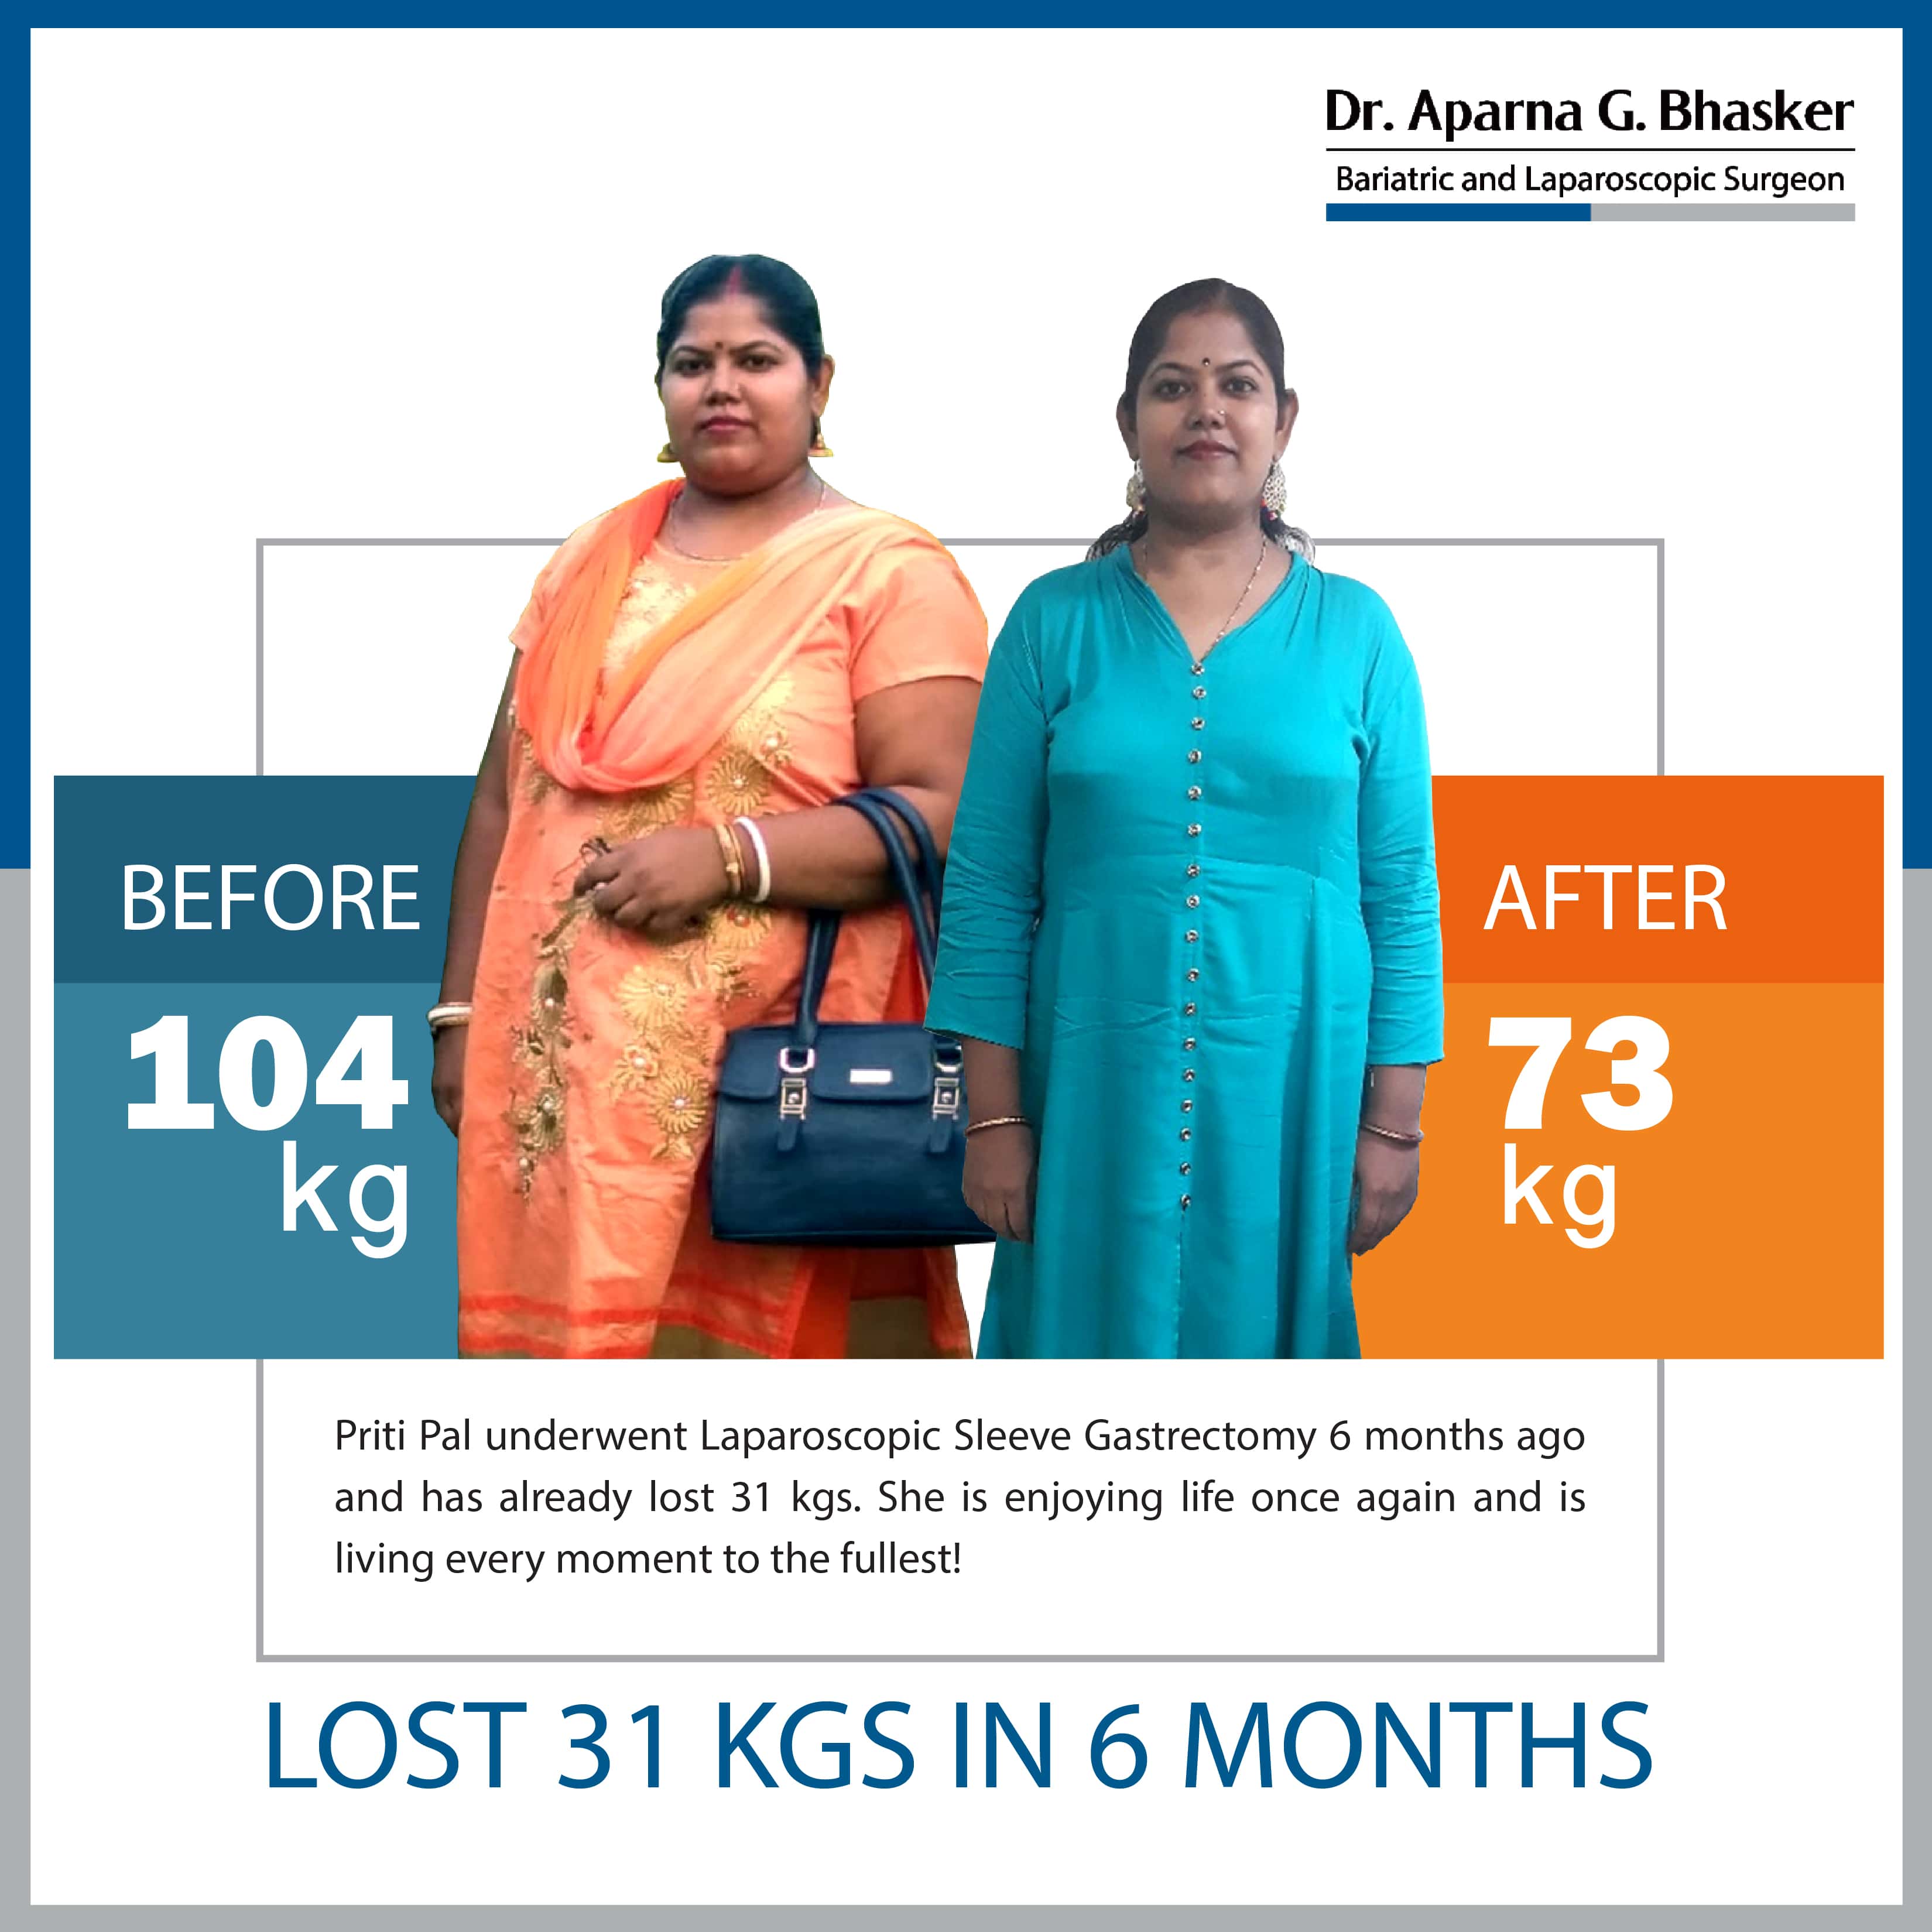 best Single Incision Sleeve Gastrectomy bariatric surgery and weight loss surgery cost in mumbai india before after photos (5)